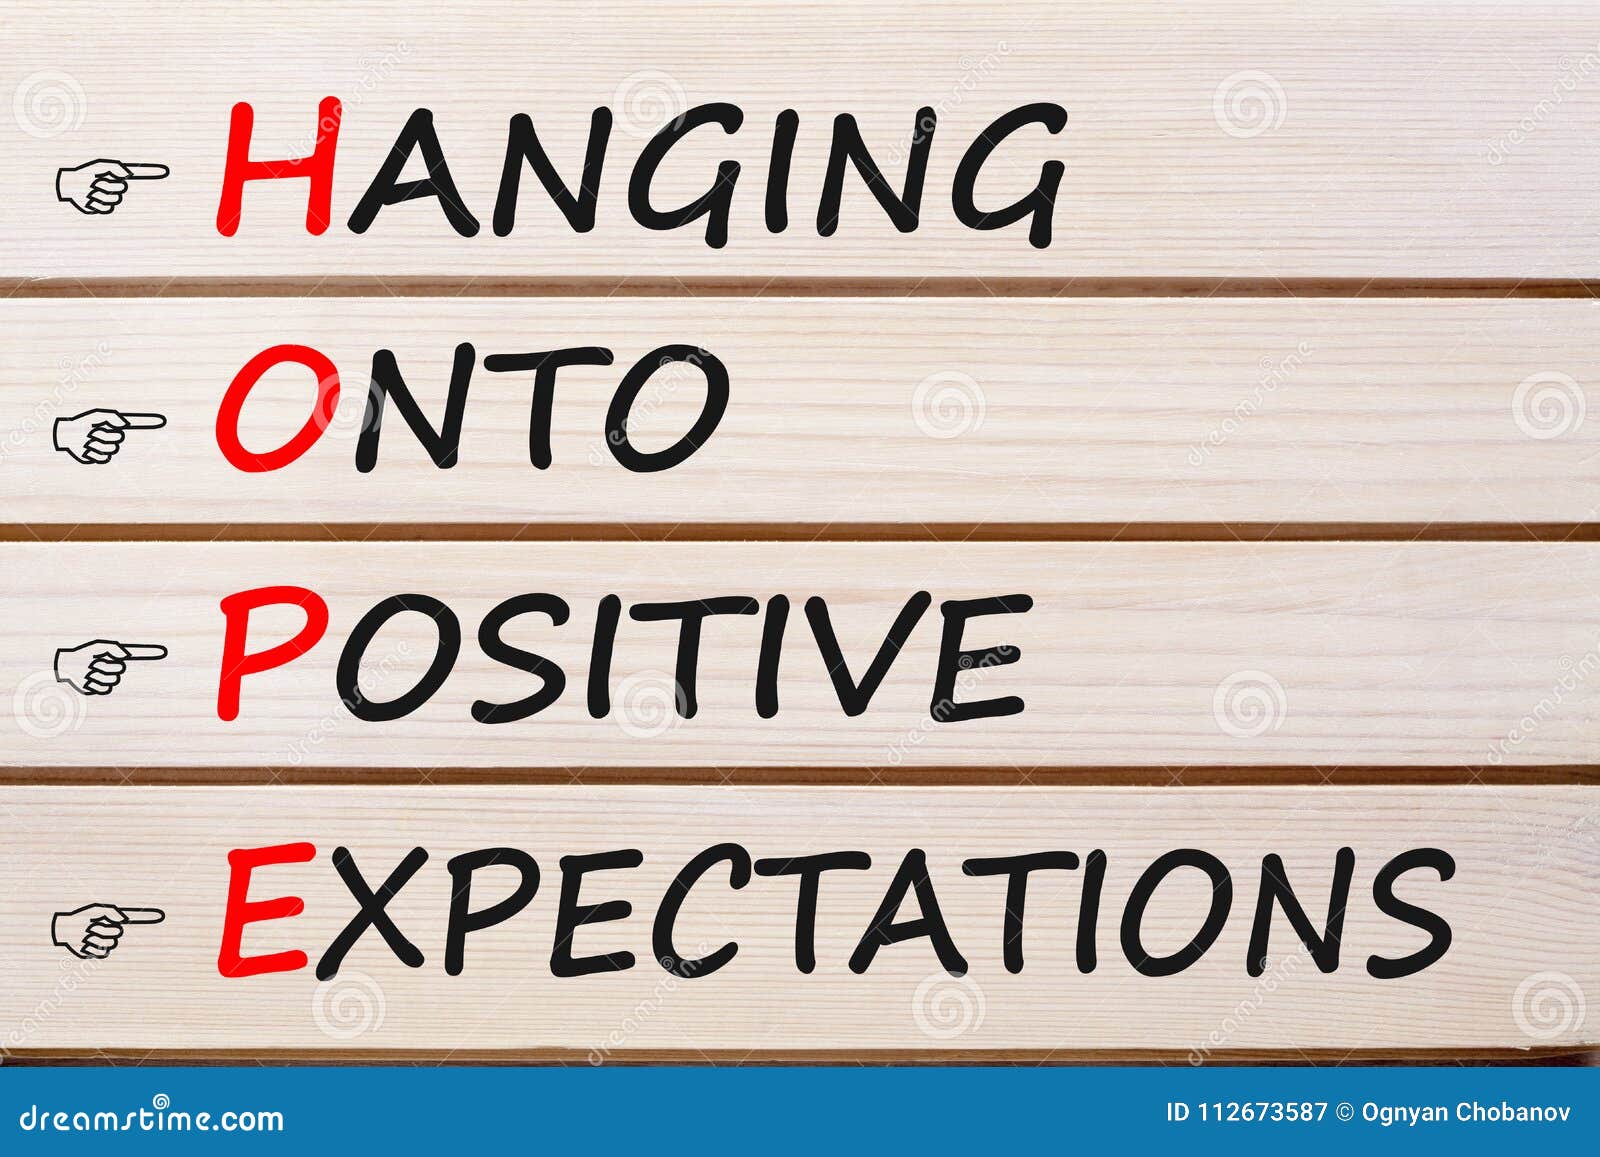 hanging onto positive expectations hope